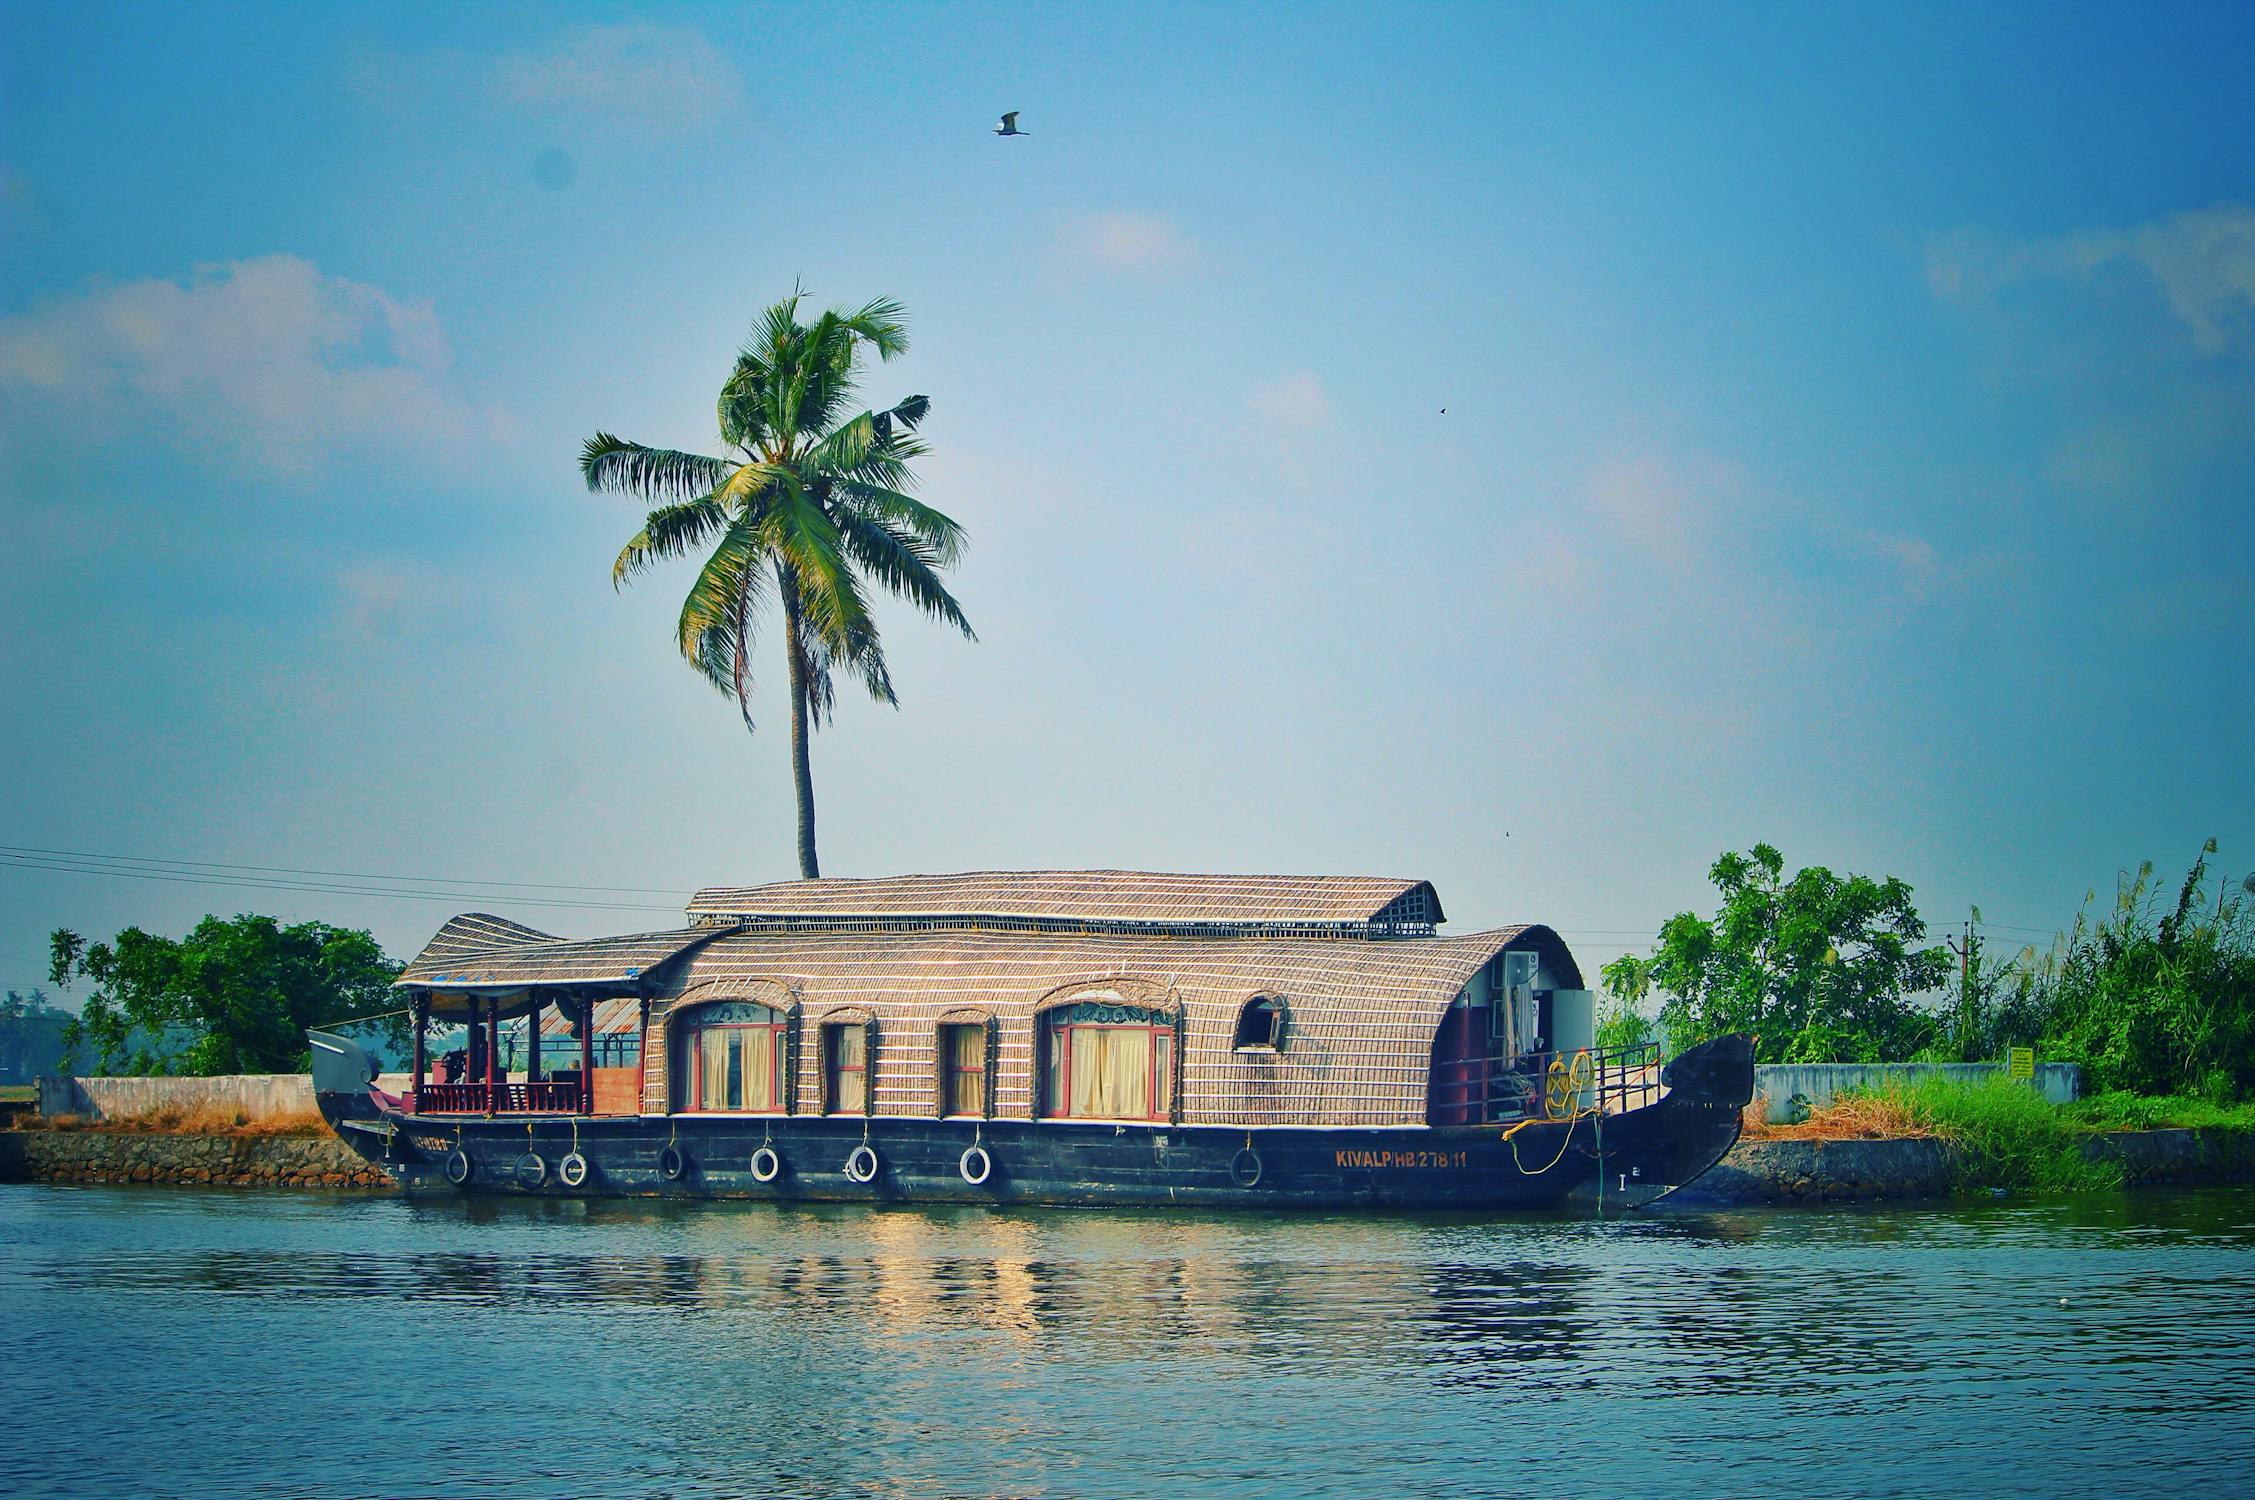 Travel India Photo by Godson Bright from Pexels: https://www.pexels.com/photo/houseboat-on-river-among-exotic-nature-962464/